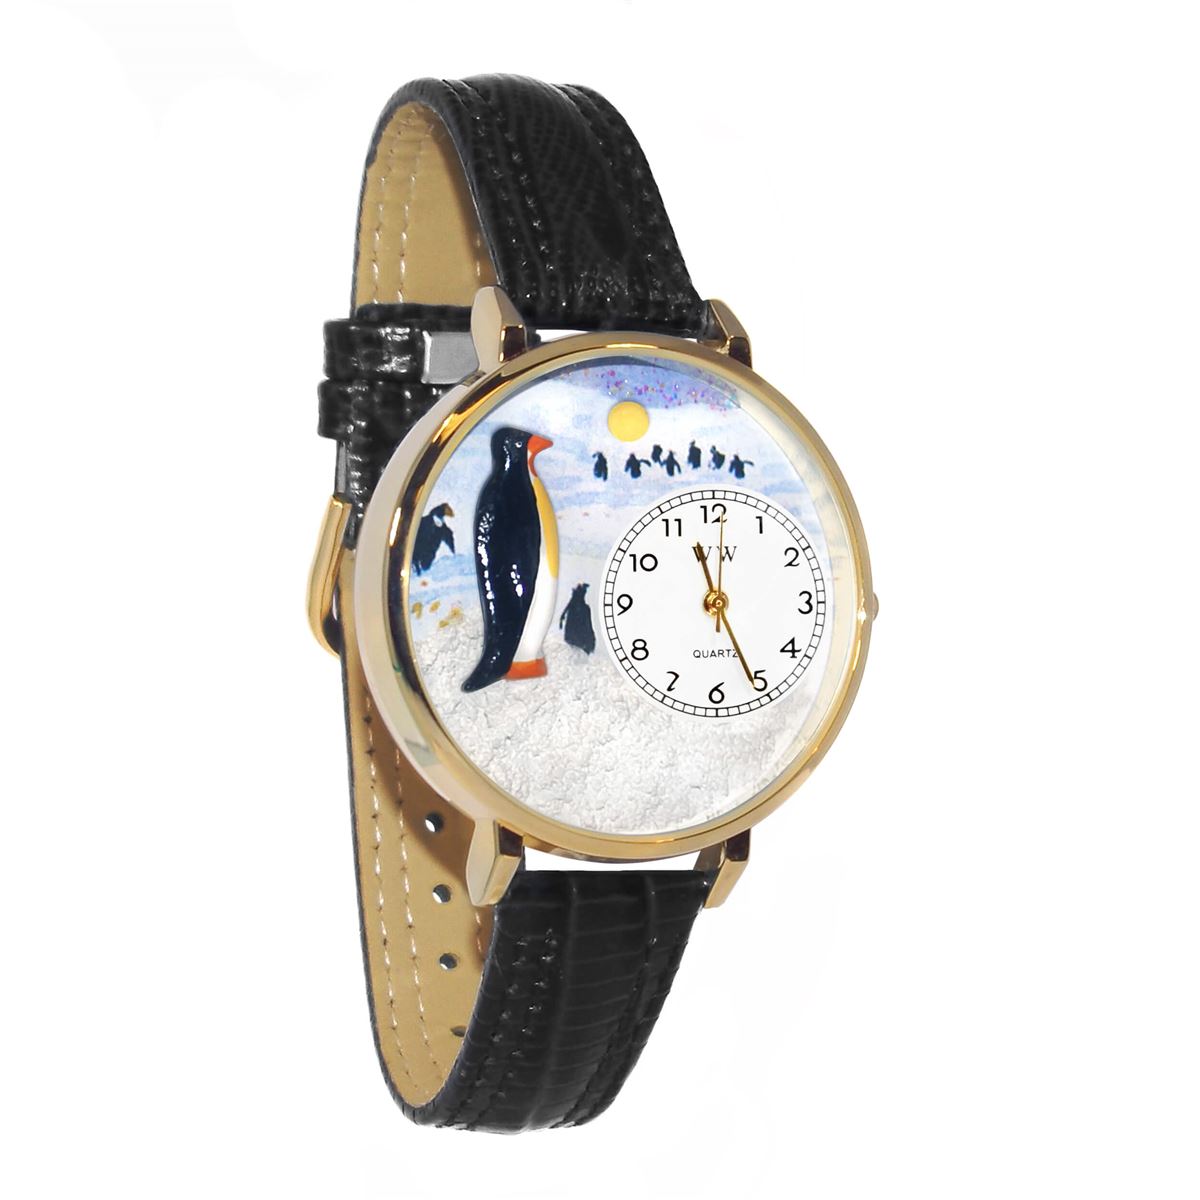 Whimsical Gifts | Penguin 3D Watch Large Style | Handmade in USA | Animal Lover | Zoo & Sealife | Novelty Unique Fun Miniatures Gift | Gold Finish Black Leather Watch Band